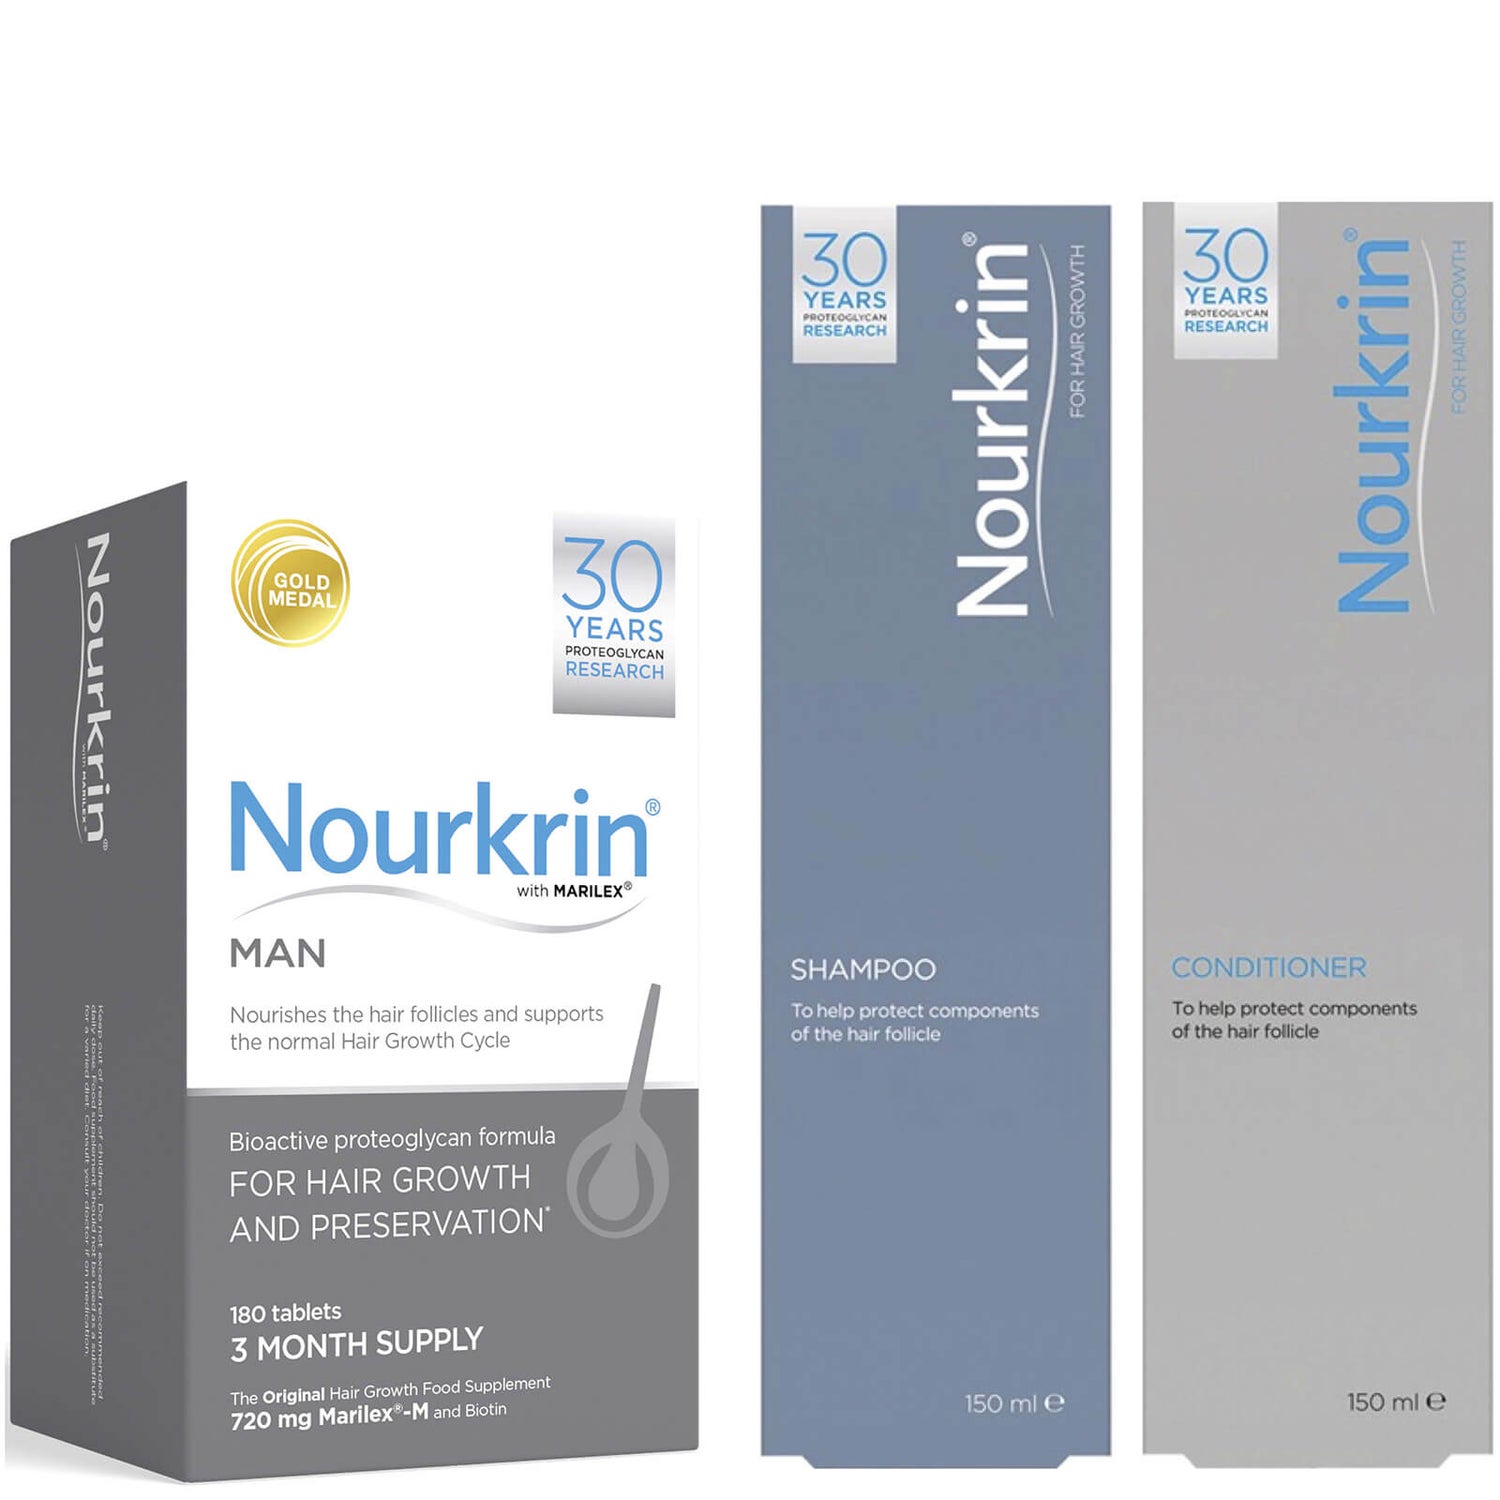 Nourkrin Man Value Pack – 180 Tablets + Shampoo & Conditioner (2 x 150 ml)